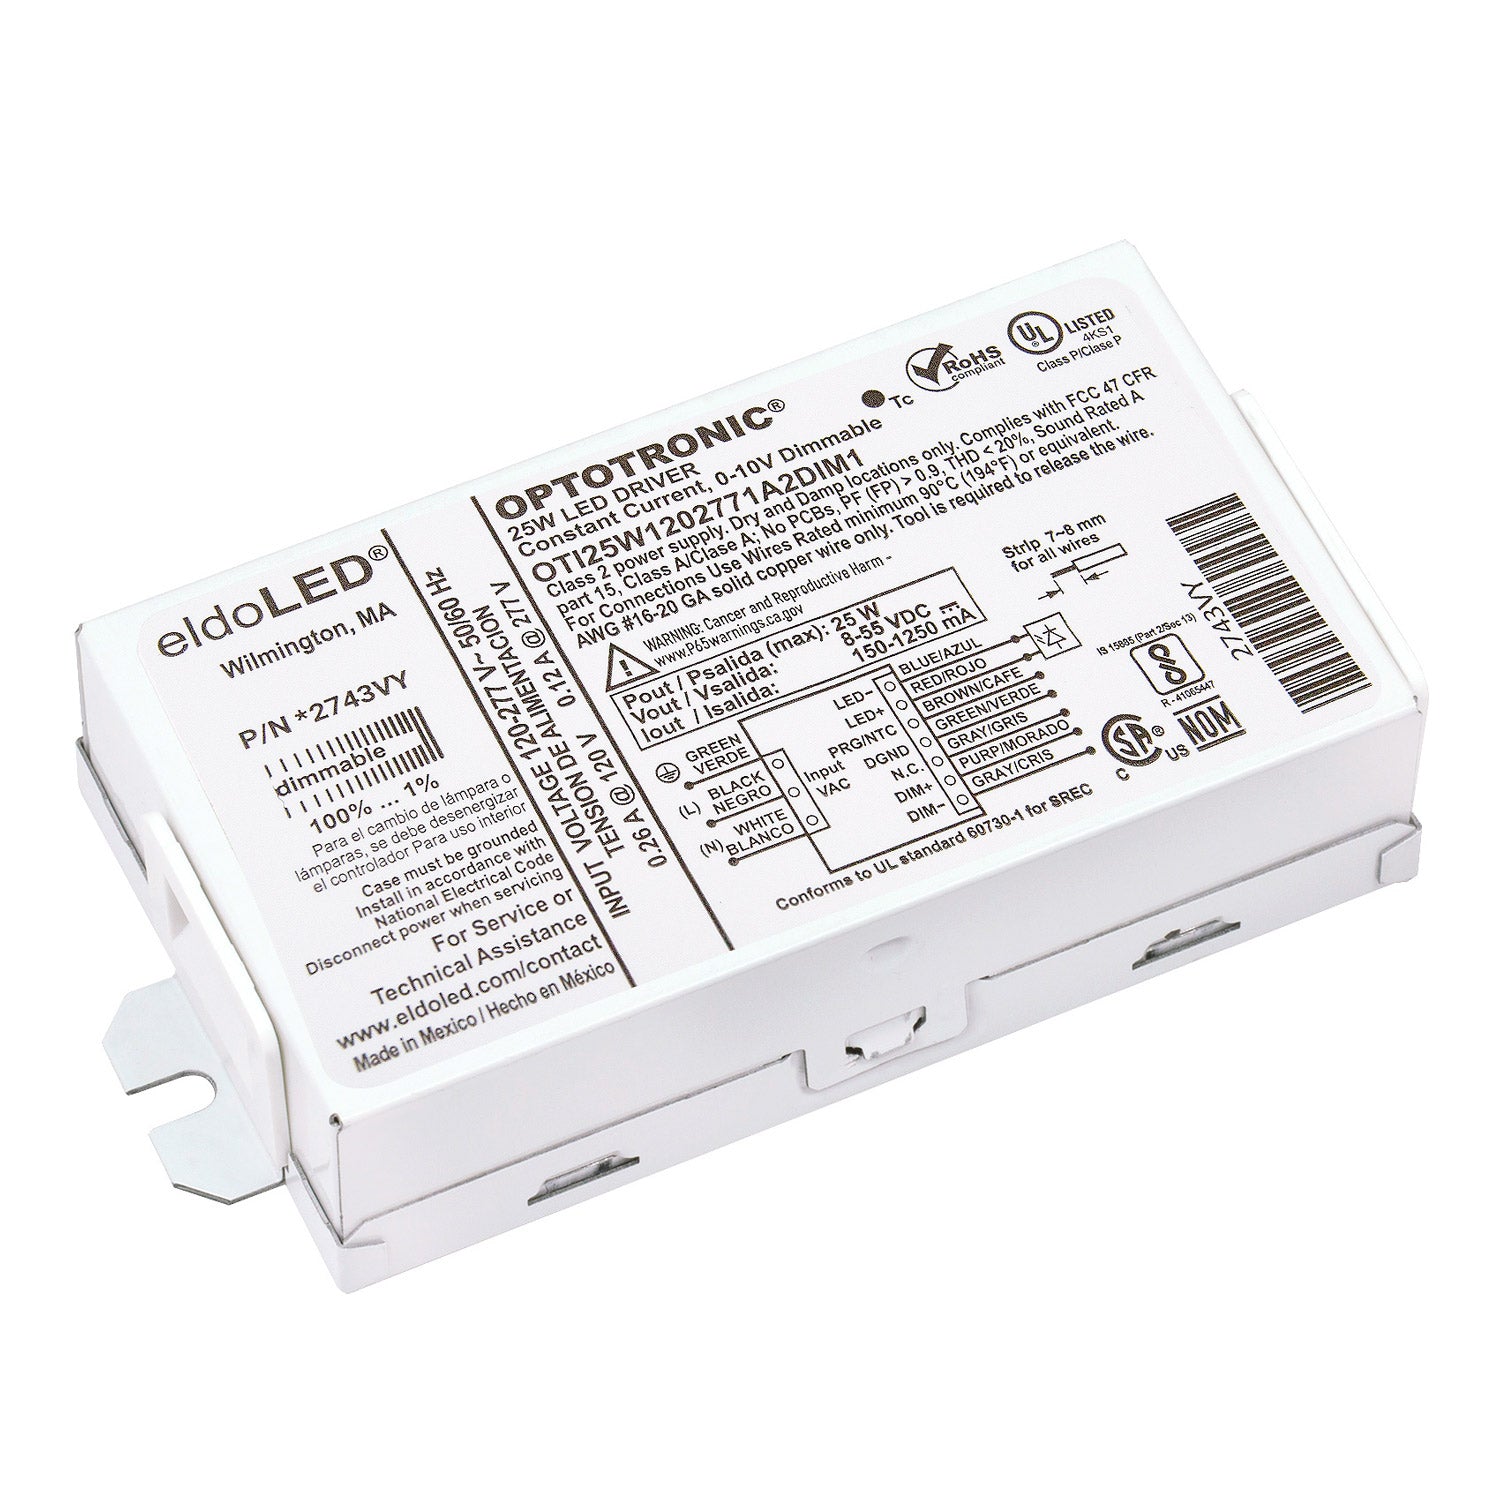 eldoLED OPTOTRONIC 25W Constant 0-10V Dimmable Dri – sirs-e.us